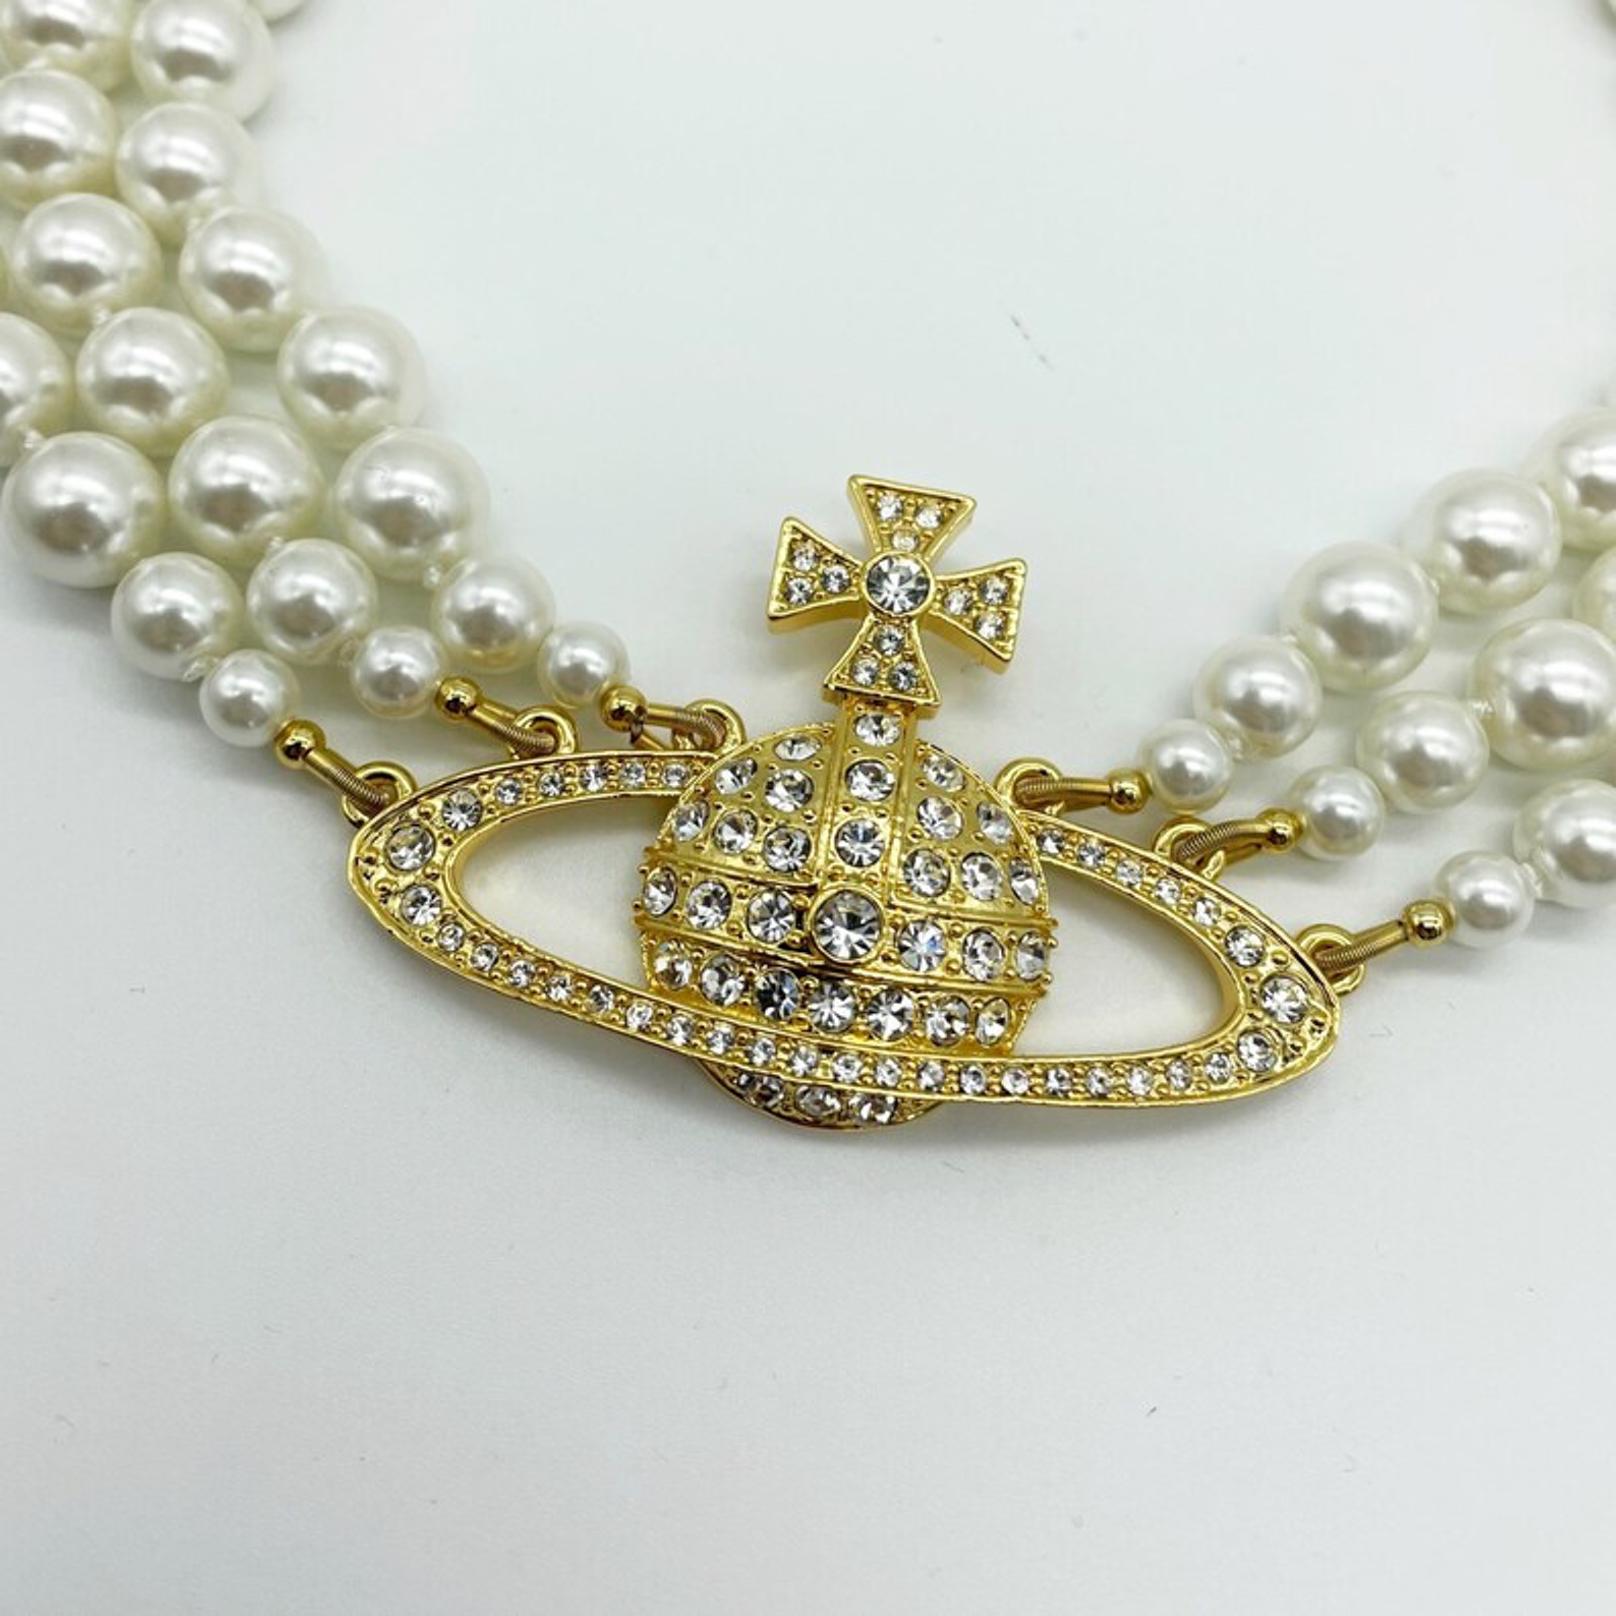 Perfected and luxurious gold tone plating, the three row Bas Relief Choker resists an Vivienne Westwood collection, dating back decades. Featuring three hand knotted rows of Swarovski pearls meeting together at a branded closure at the back, the